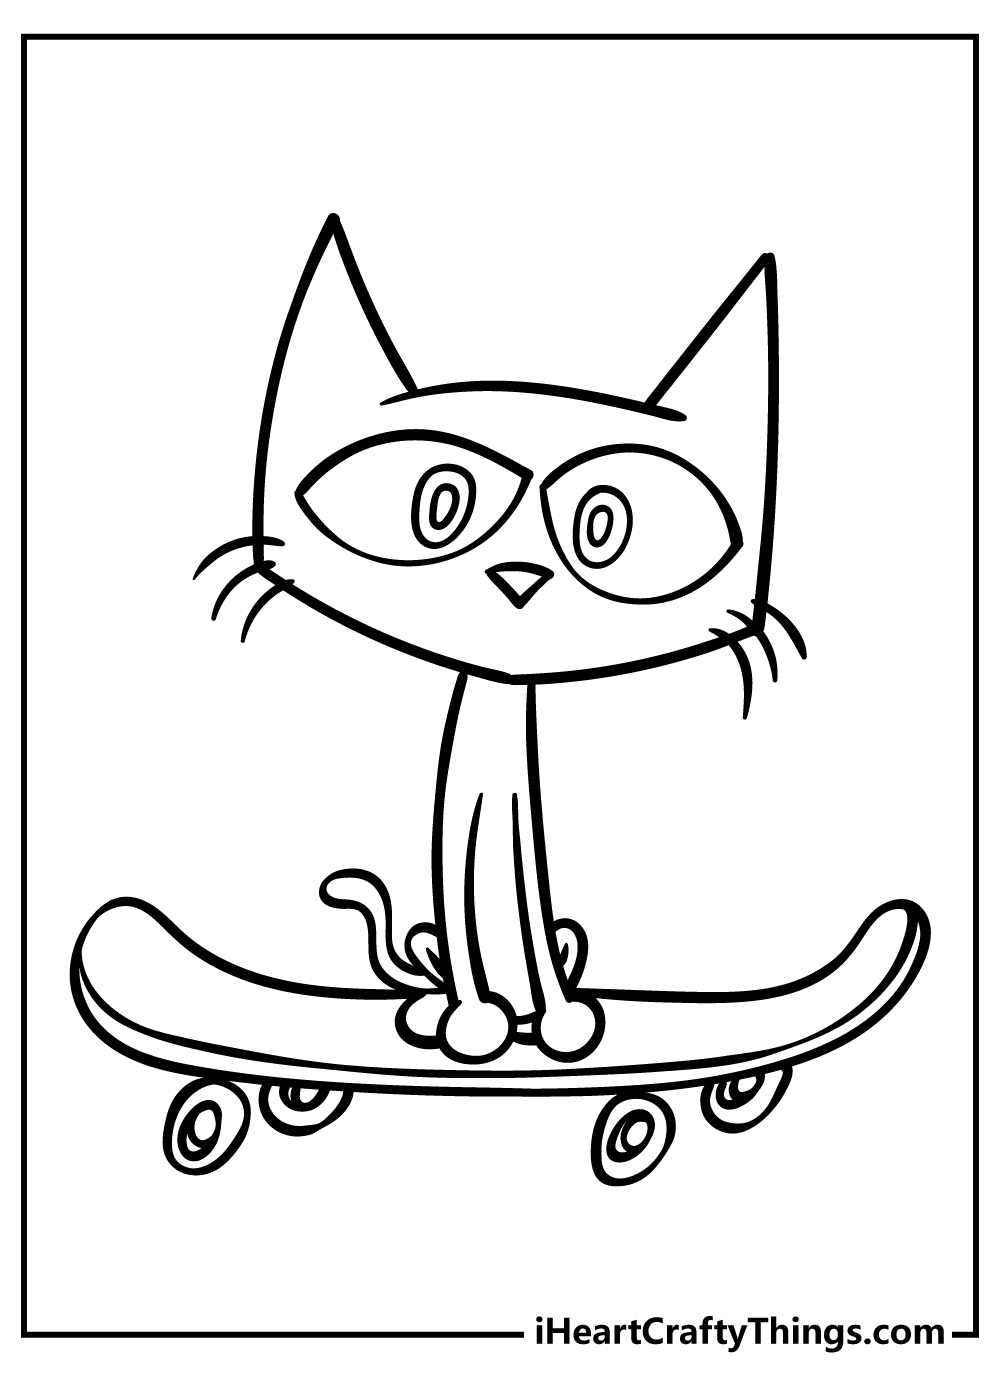 Pete The Cat Coloring Book for kids free printable